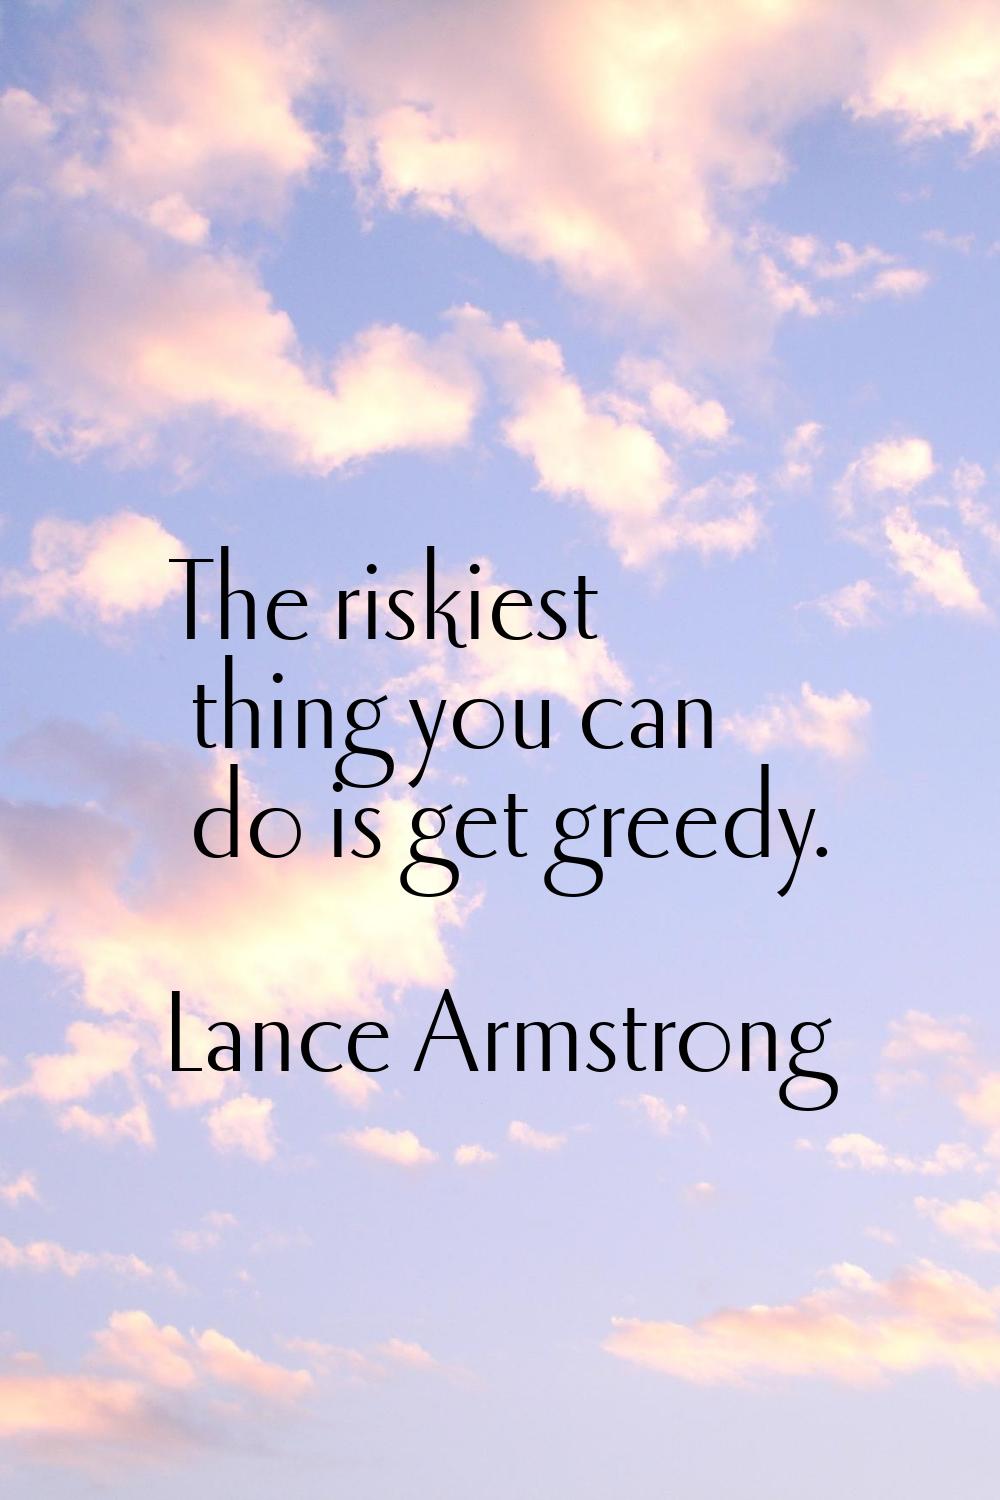 The riskiest thing you can do is get greedy.